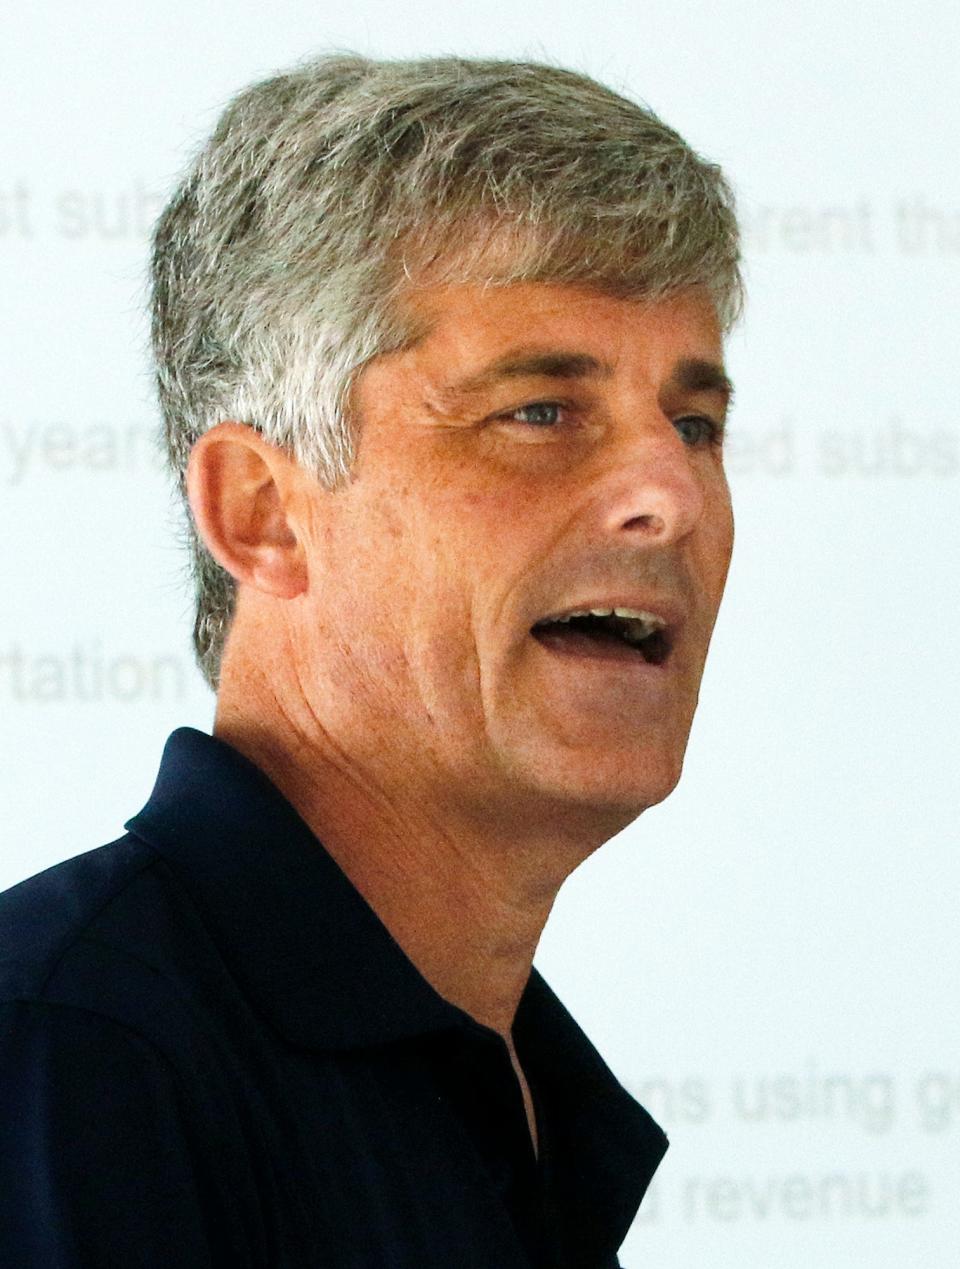 FILE - OceanGate CEO and co-founder Stockton Rush speaks during a presentation on findings after an undersea exploration of the SS Andrea Doria wreckage in the Atlantic Ocean near Nantucket, on June 13, 2016, in Boston. The missing submersible Titan imploded near the wreckage of the Titanic, killing all five people, Shahzada Dawood, Suleman Dawood, Paul-Henry Nargeolet, Stockton Rush, and Hamish Harding, the U.S. Coast Guard announced, Thursday, June 22, 2023.